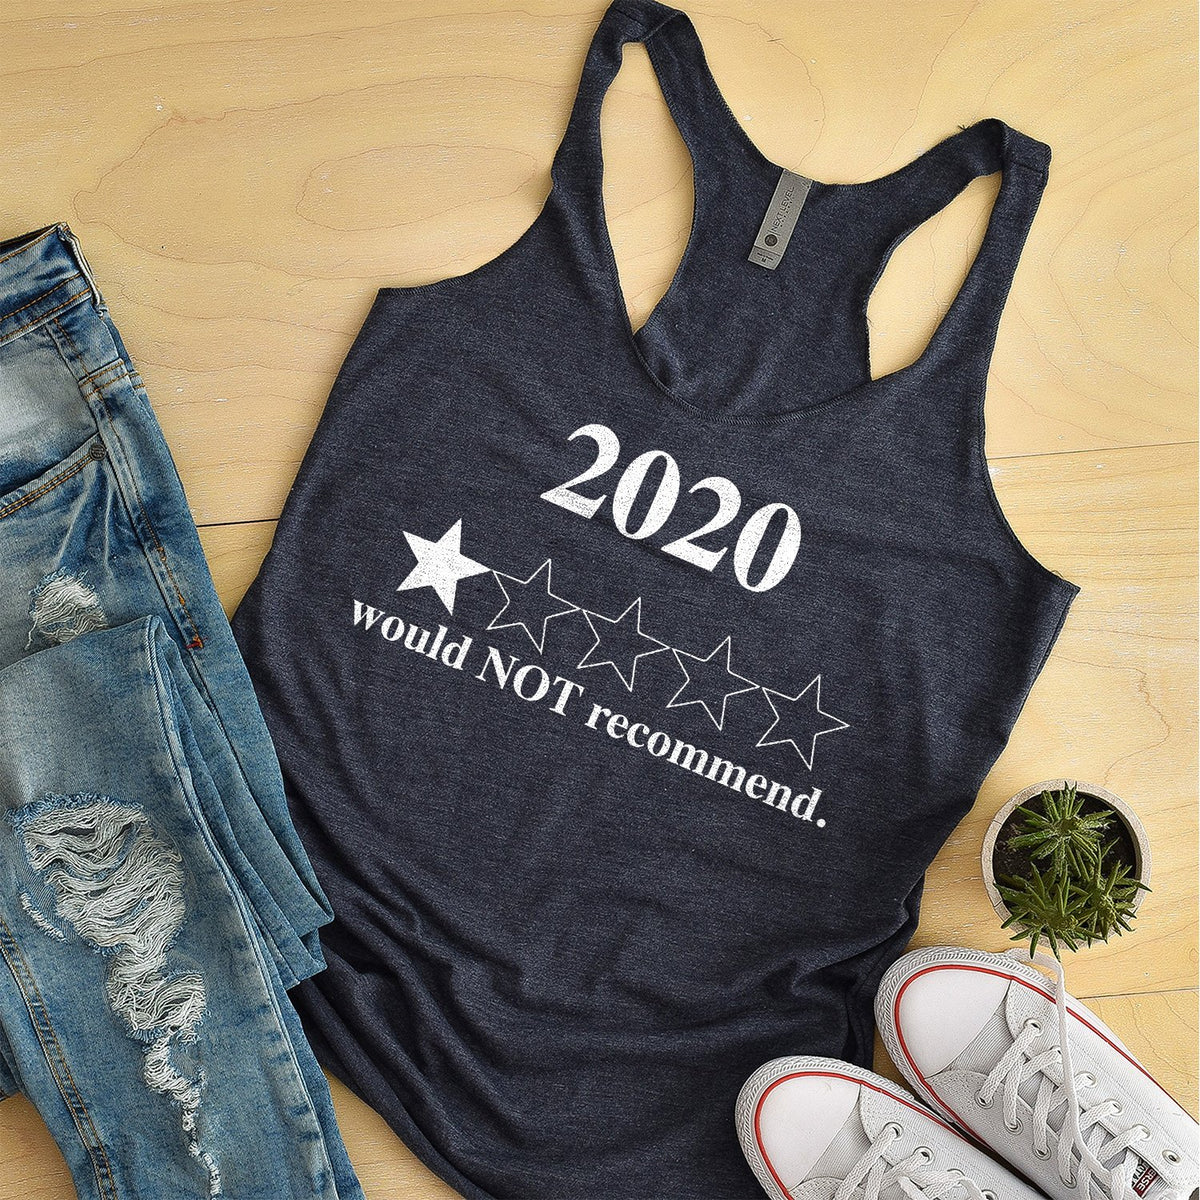 2020 Would Not Recommend - Tank Top Racerback